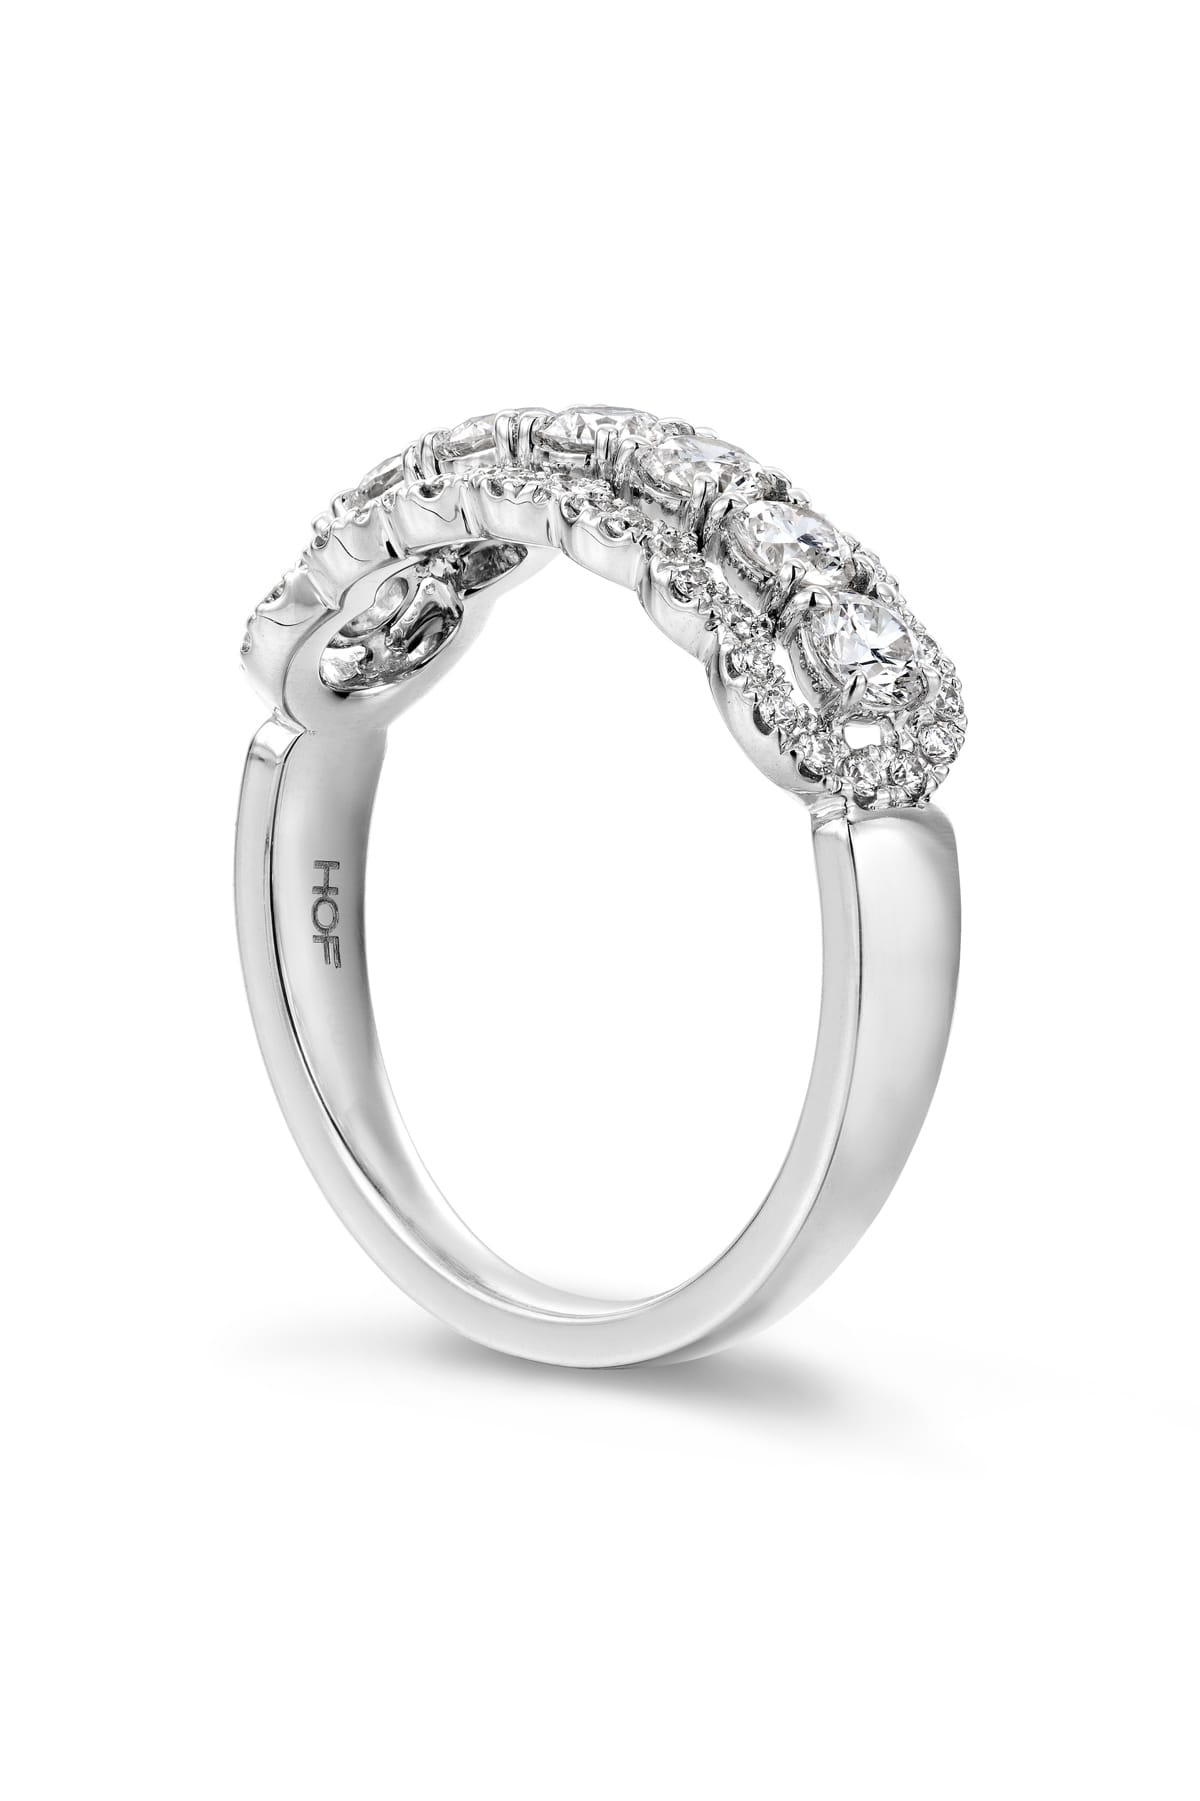 Aurora Seven Diamond Band From Hearts On Fire available at LeGassick Diamonds and Jewellery Gold Coast, Australia.